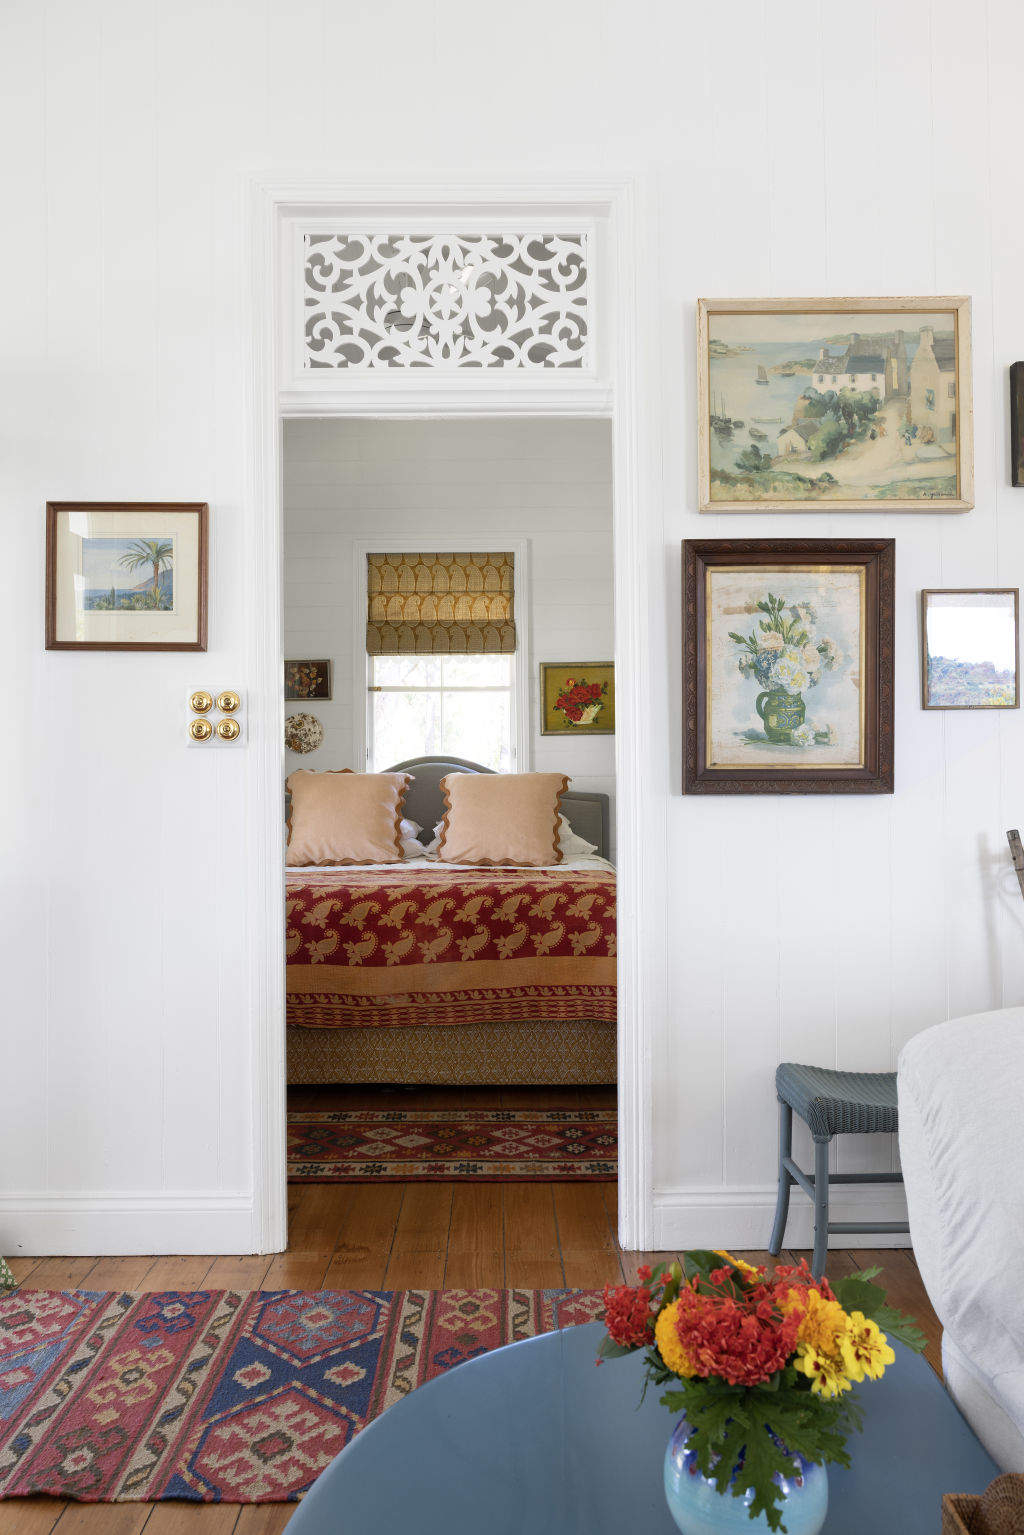 'We like an eclectic look with a mix of things, and we have collected bits and bobs of furniture over the years,' Sue says of their interior style. Photo: The Design Villa